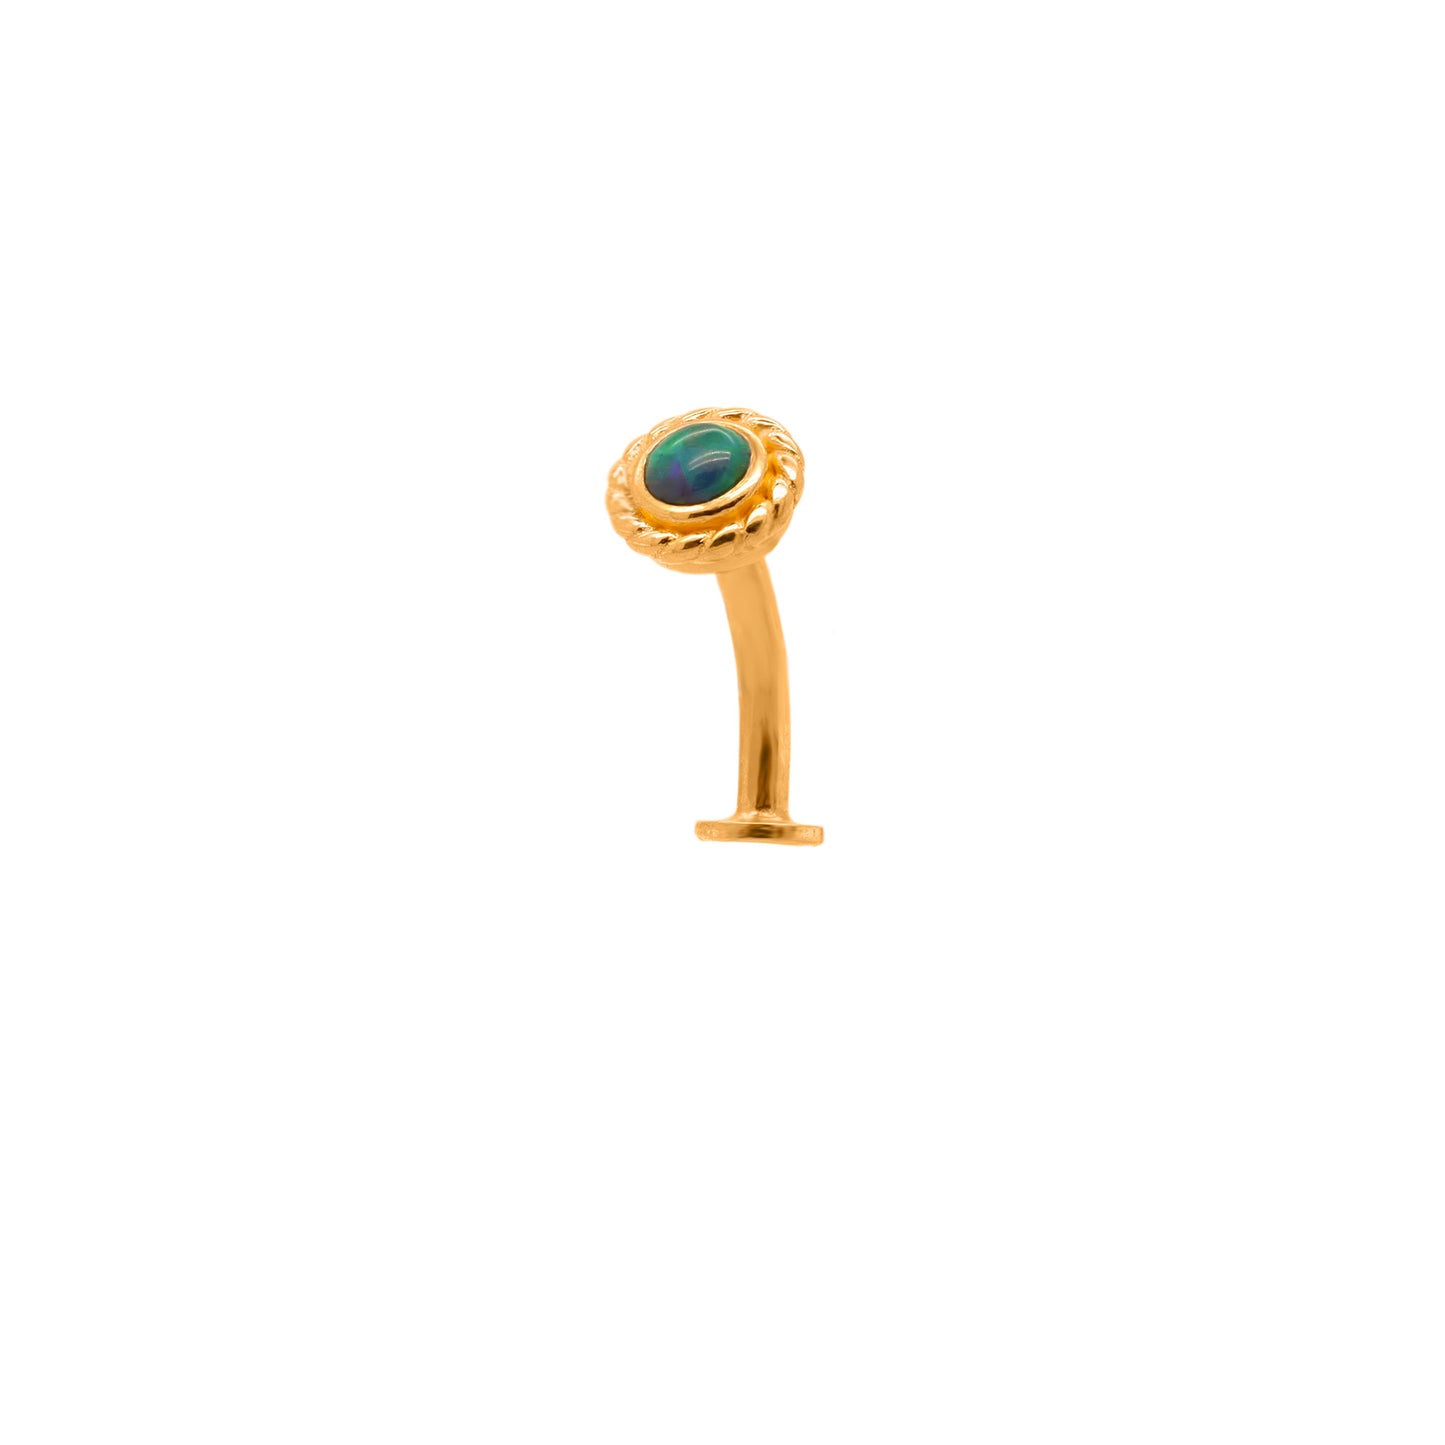 Vermeil | 24k Gold Coated 925 Silver 14G Petite Sun Black Opal Floating Belly Ring | 6mm 1/4" 8mm 5/16" 10mm 3/8" - Sturdy South